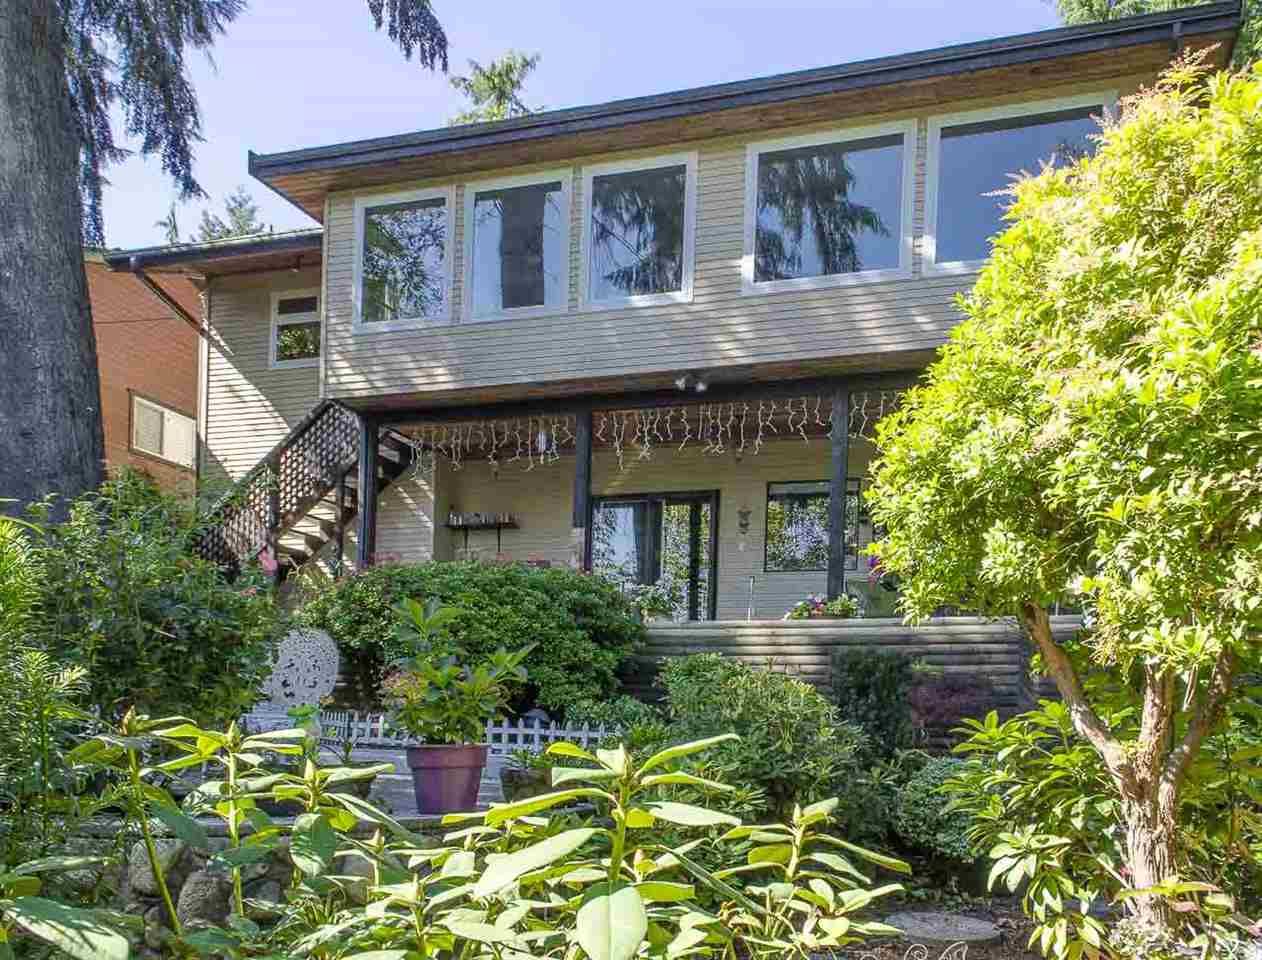 Main Photo: 1785 VIEW Street in PORT MOODY: Port Moody Centre House for sale (Port Moody)  : MLS®# R2000499